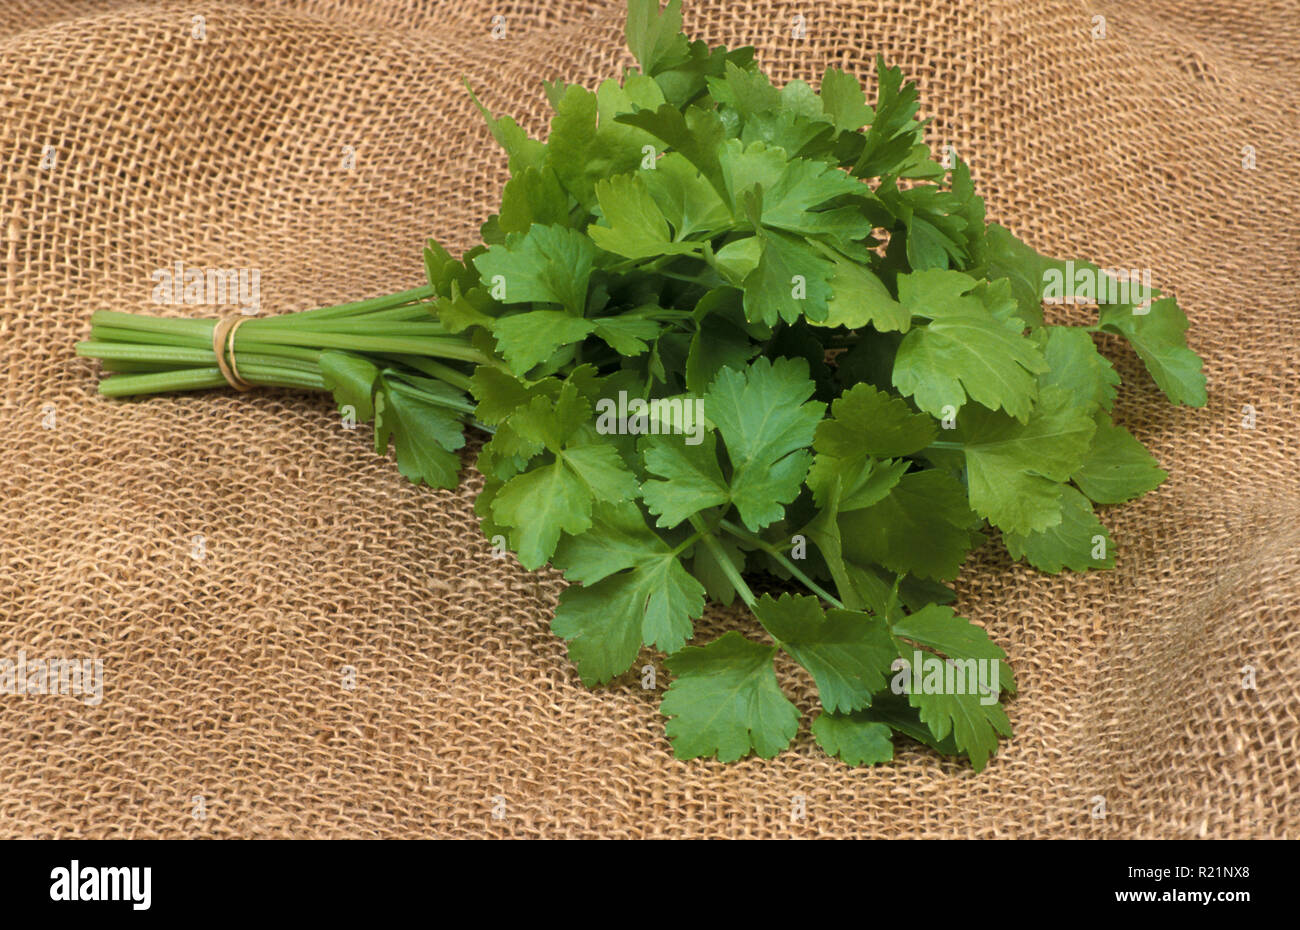 Chinese Soup Celery (Apium graveolens) is a marshland plant in the family Apiaceae that has been cultivated as a vegetable. Stock Photo